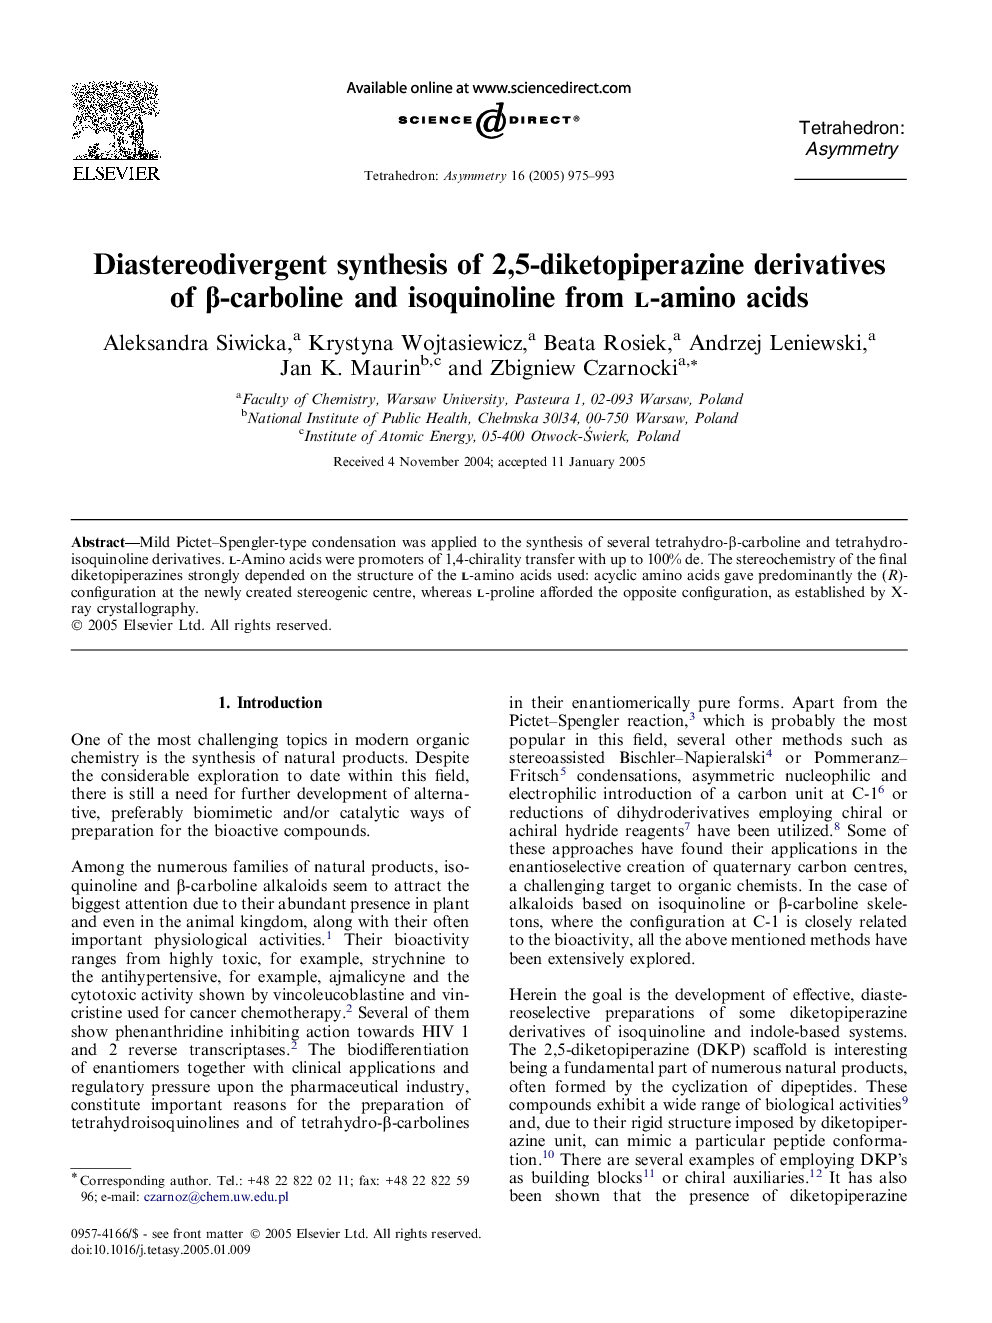 Diastereodivergent synthesis of 2,5-diketopiperazine derivatives of Î²-carboline and isoquinoline from l-amino acids